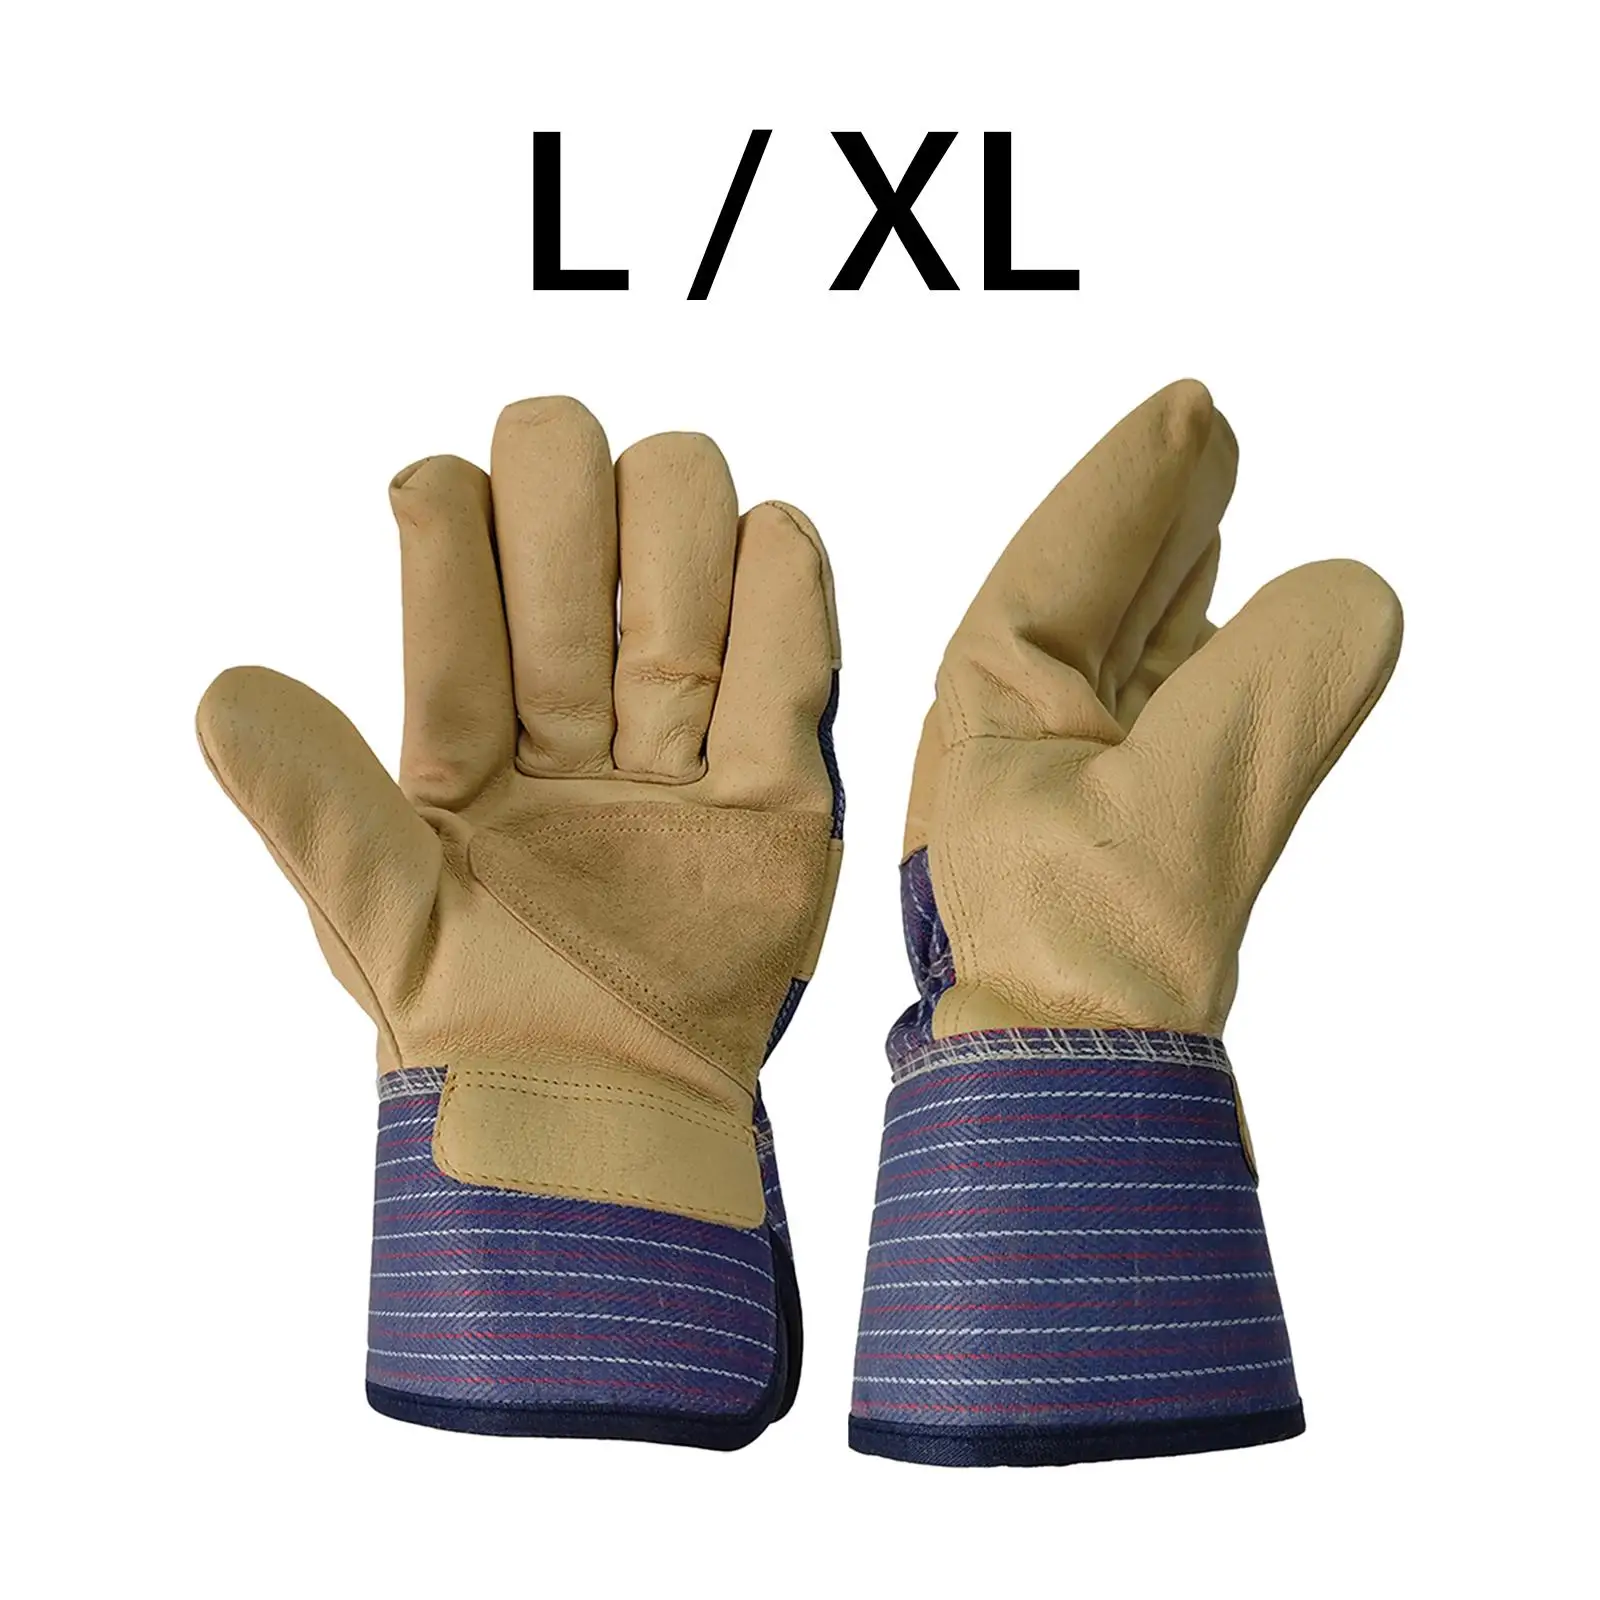 PU Leather Welding Gloves Soft Flexible Heat Insulation Anti Slip Welding Accessories Protective Gloves for Pot Holder Furnace